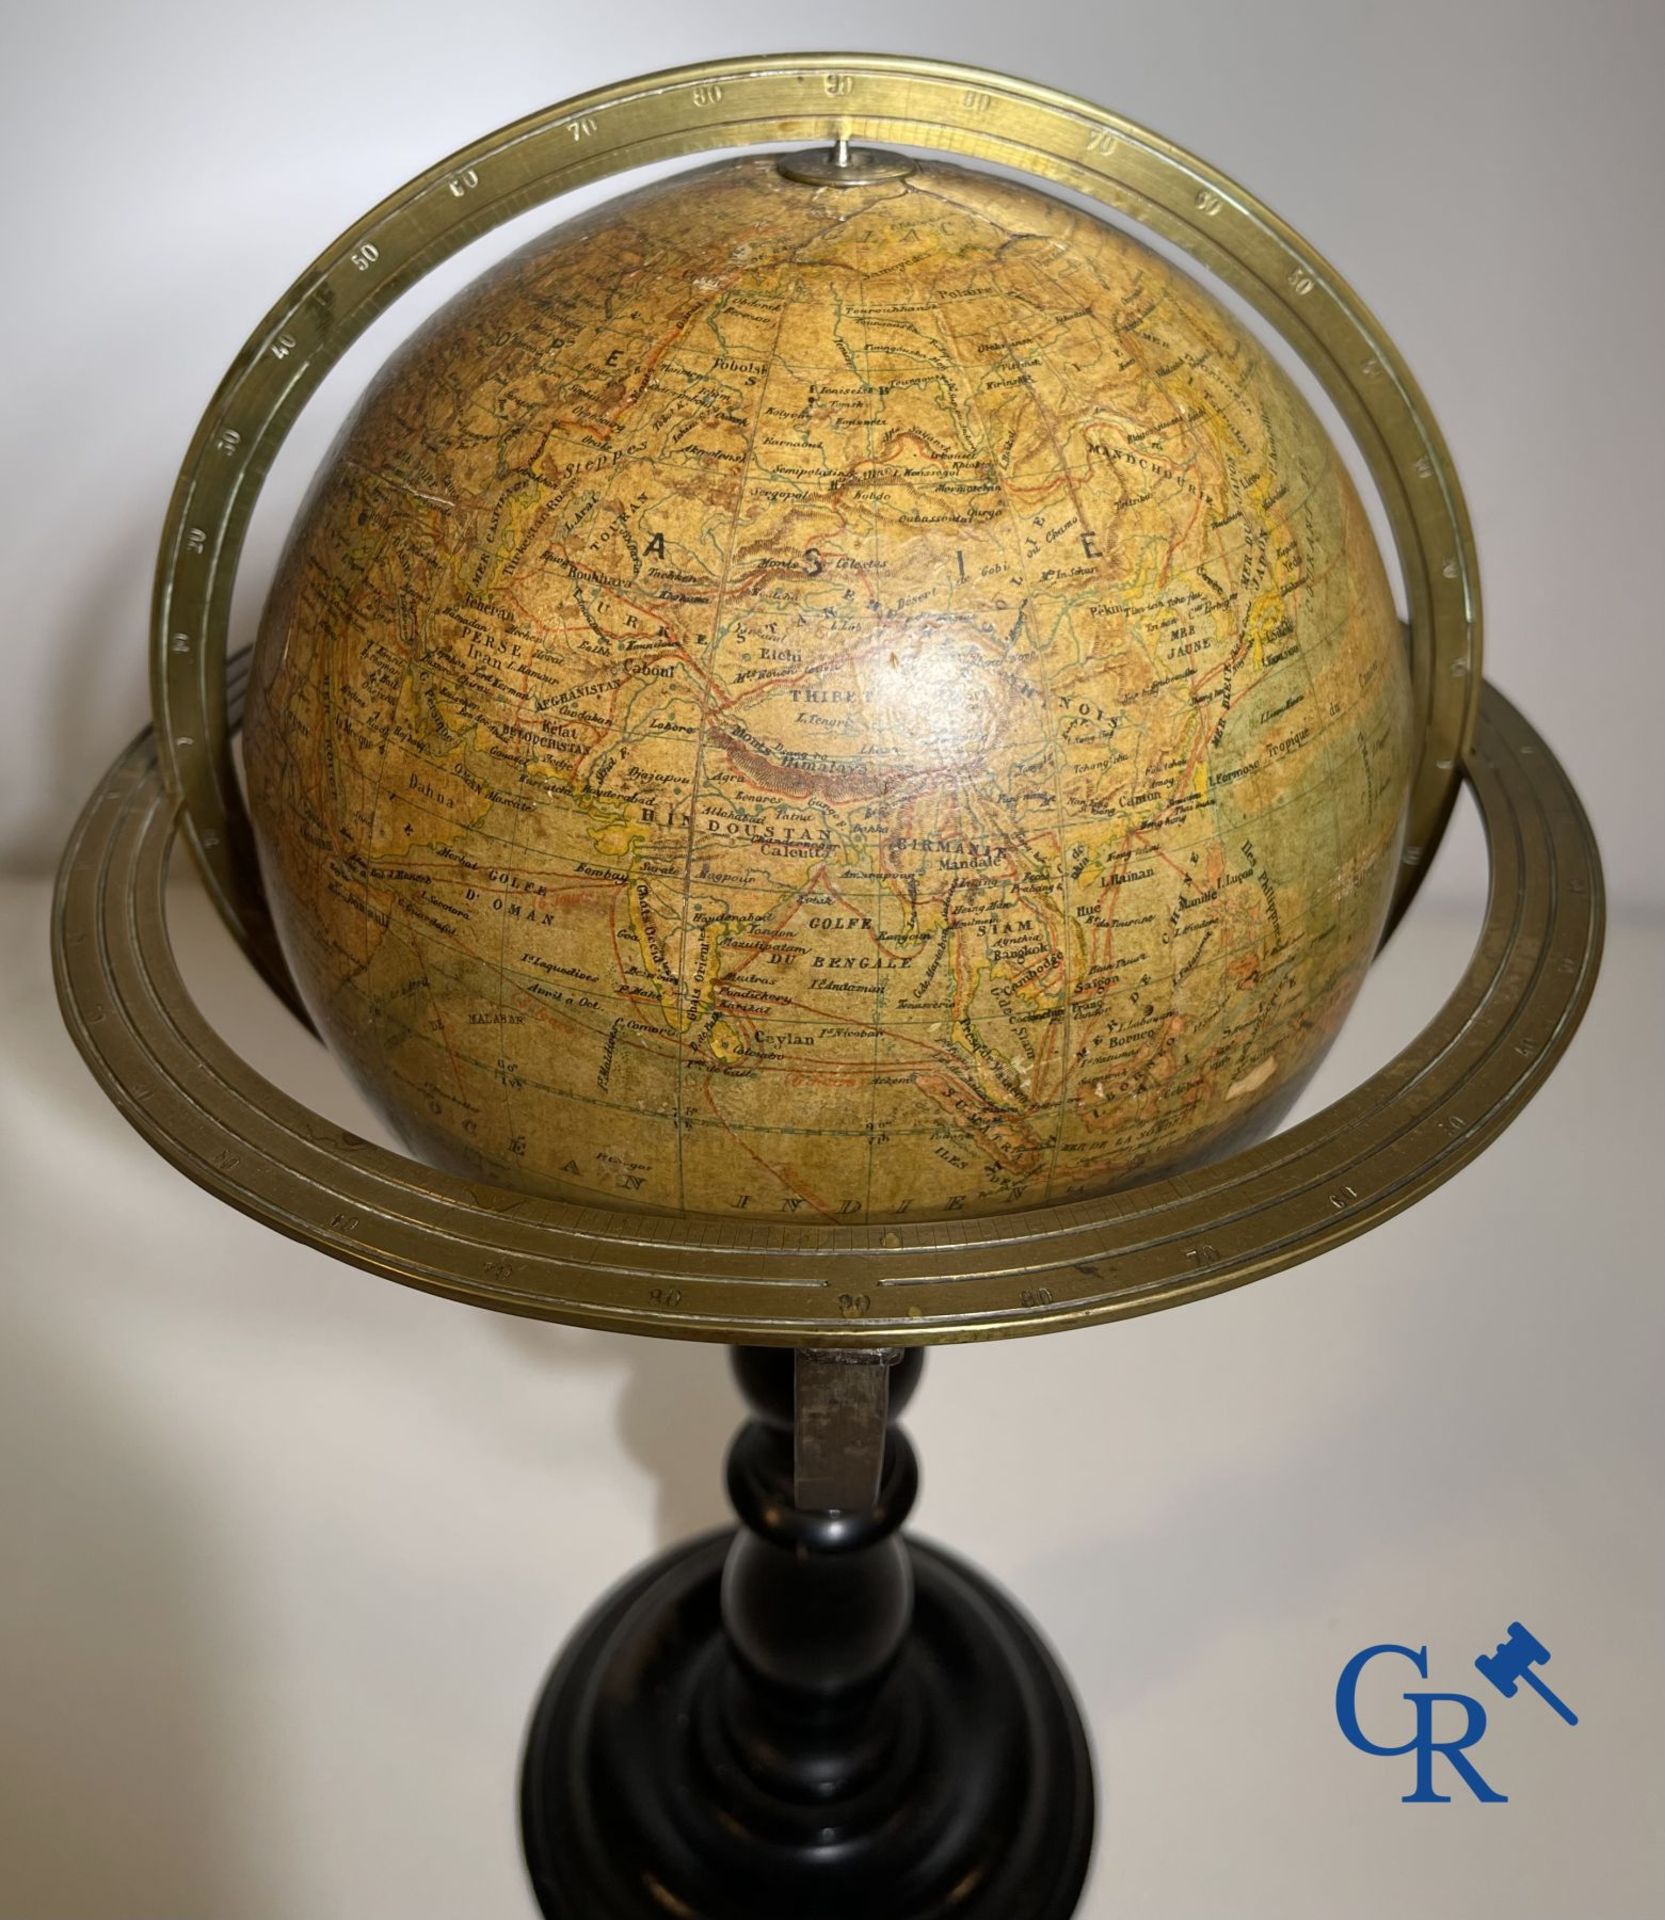 An antique globe with meridian circle on a black lacquered wooden base. 19th century. - Image 8 of 10